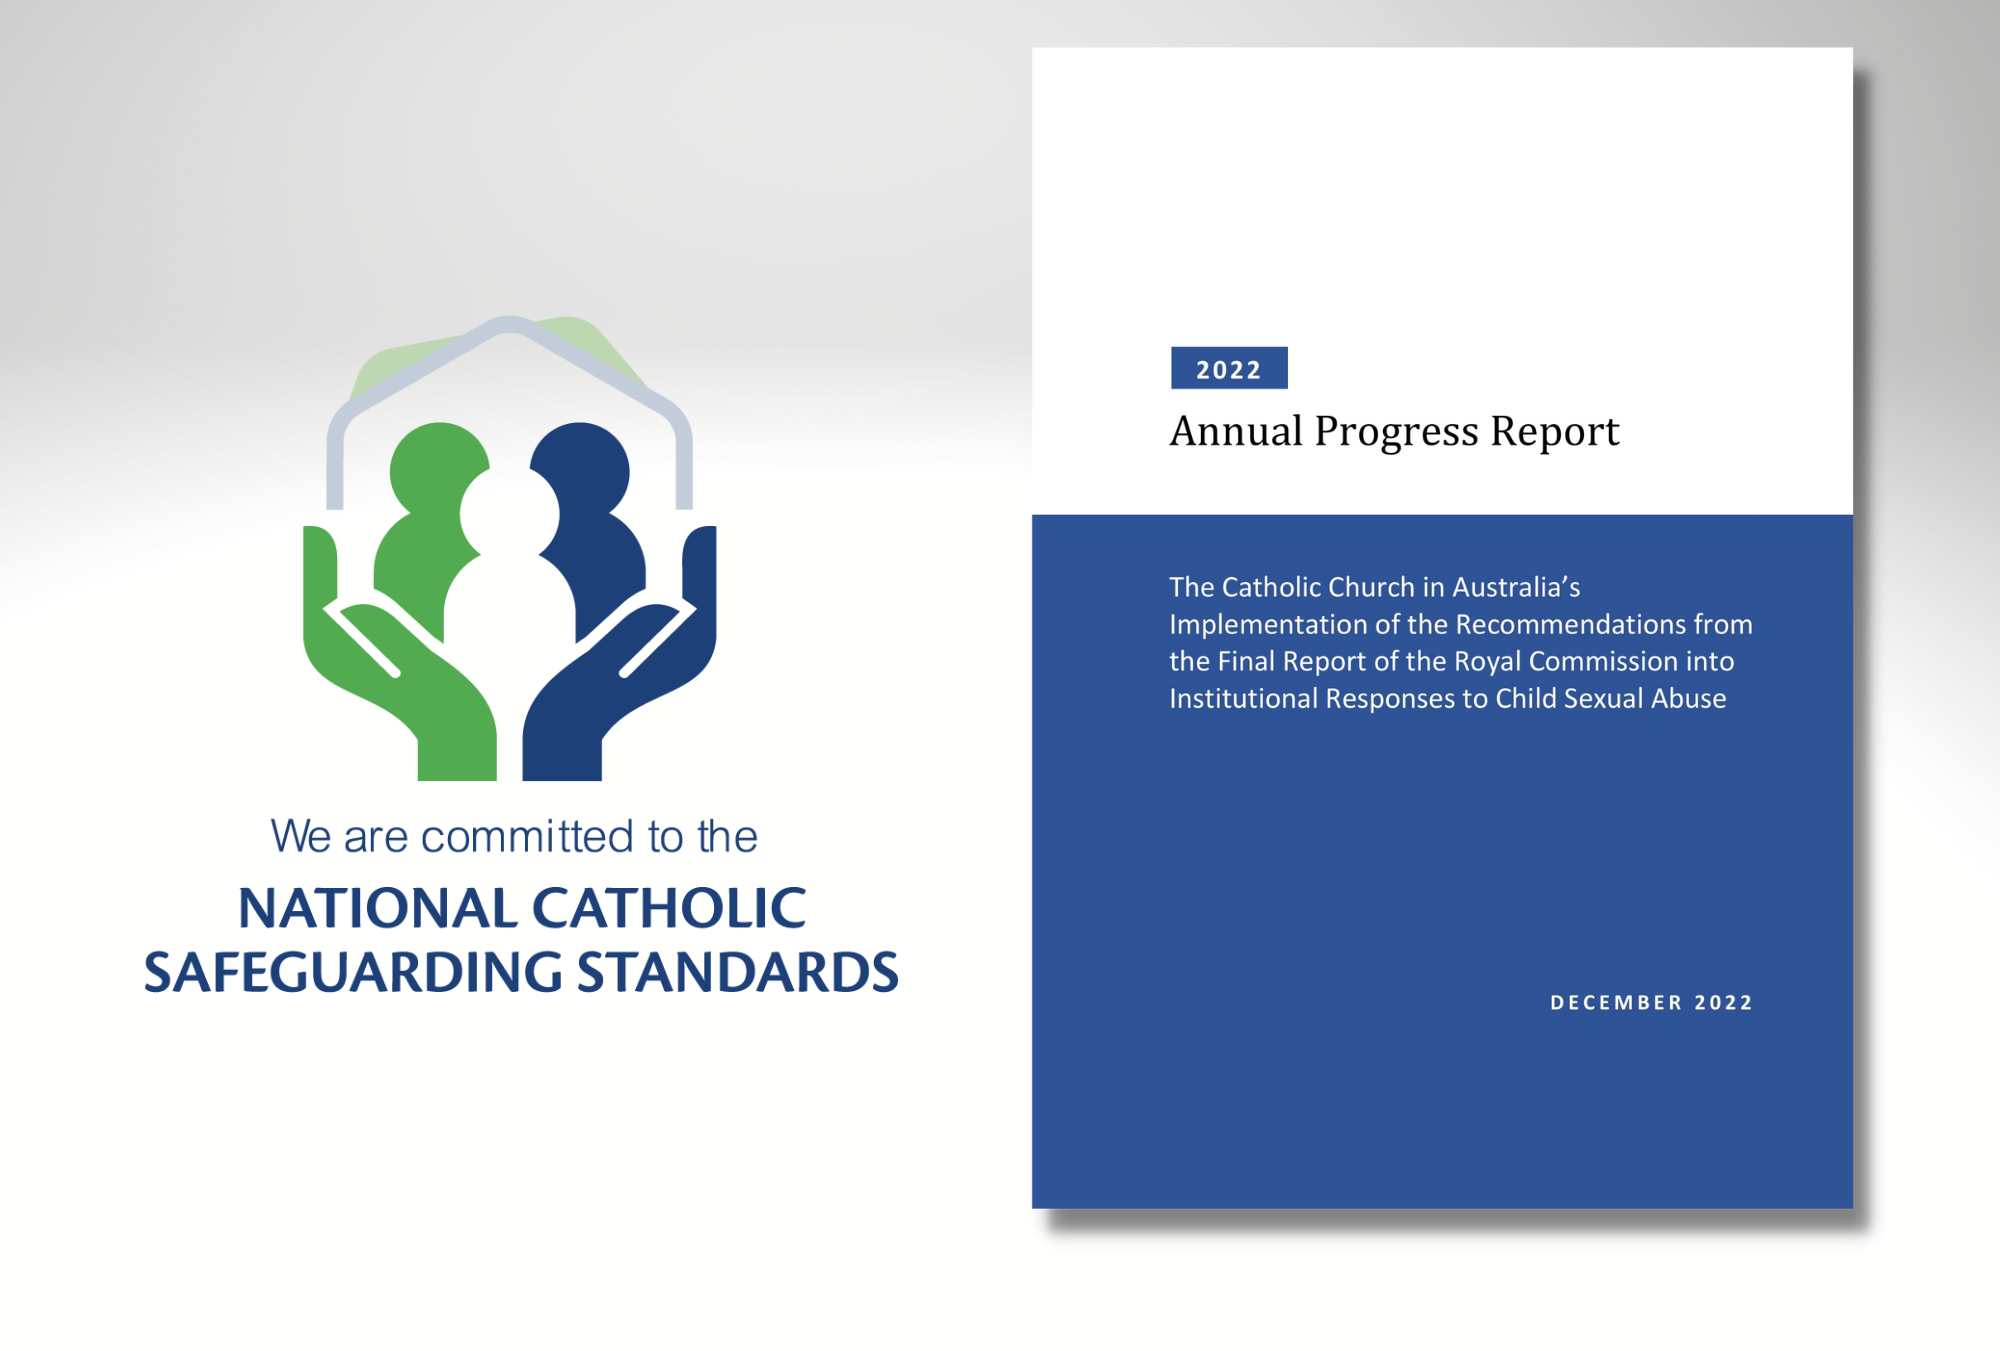 Church publishes fifth annual report on child safety